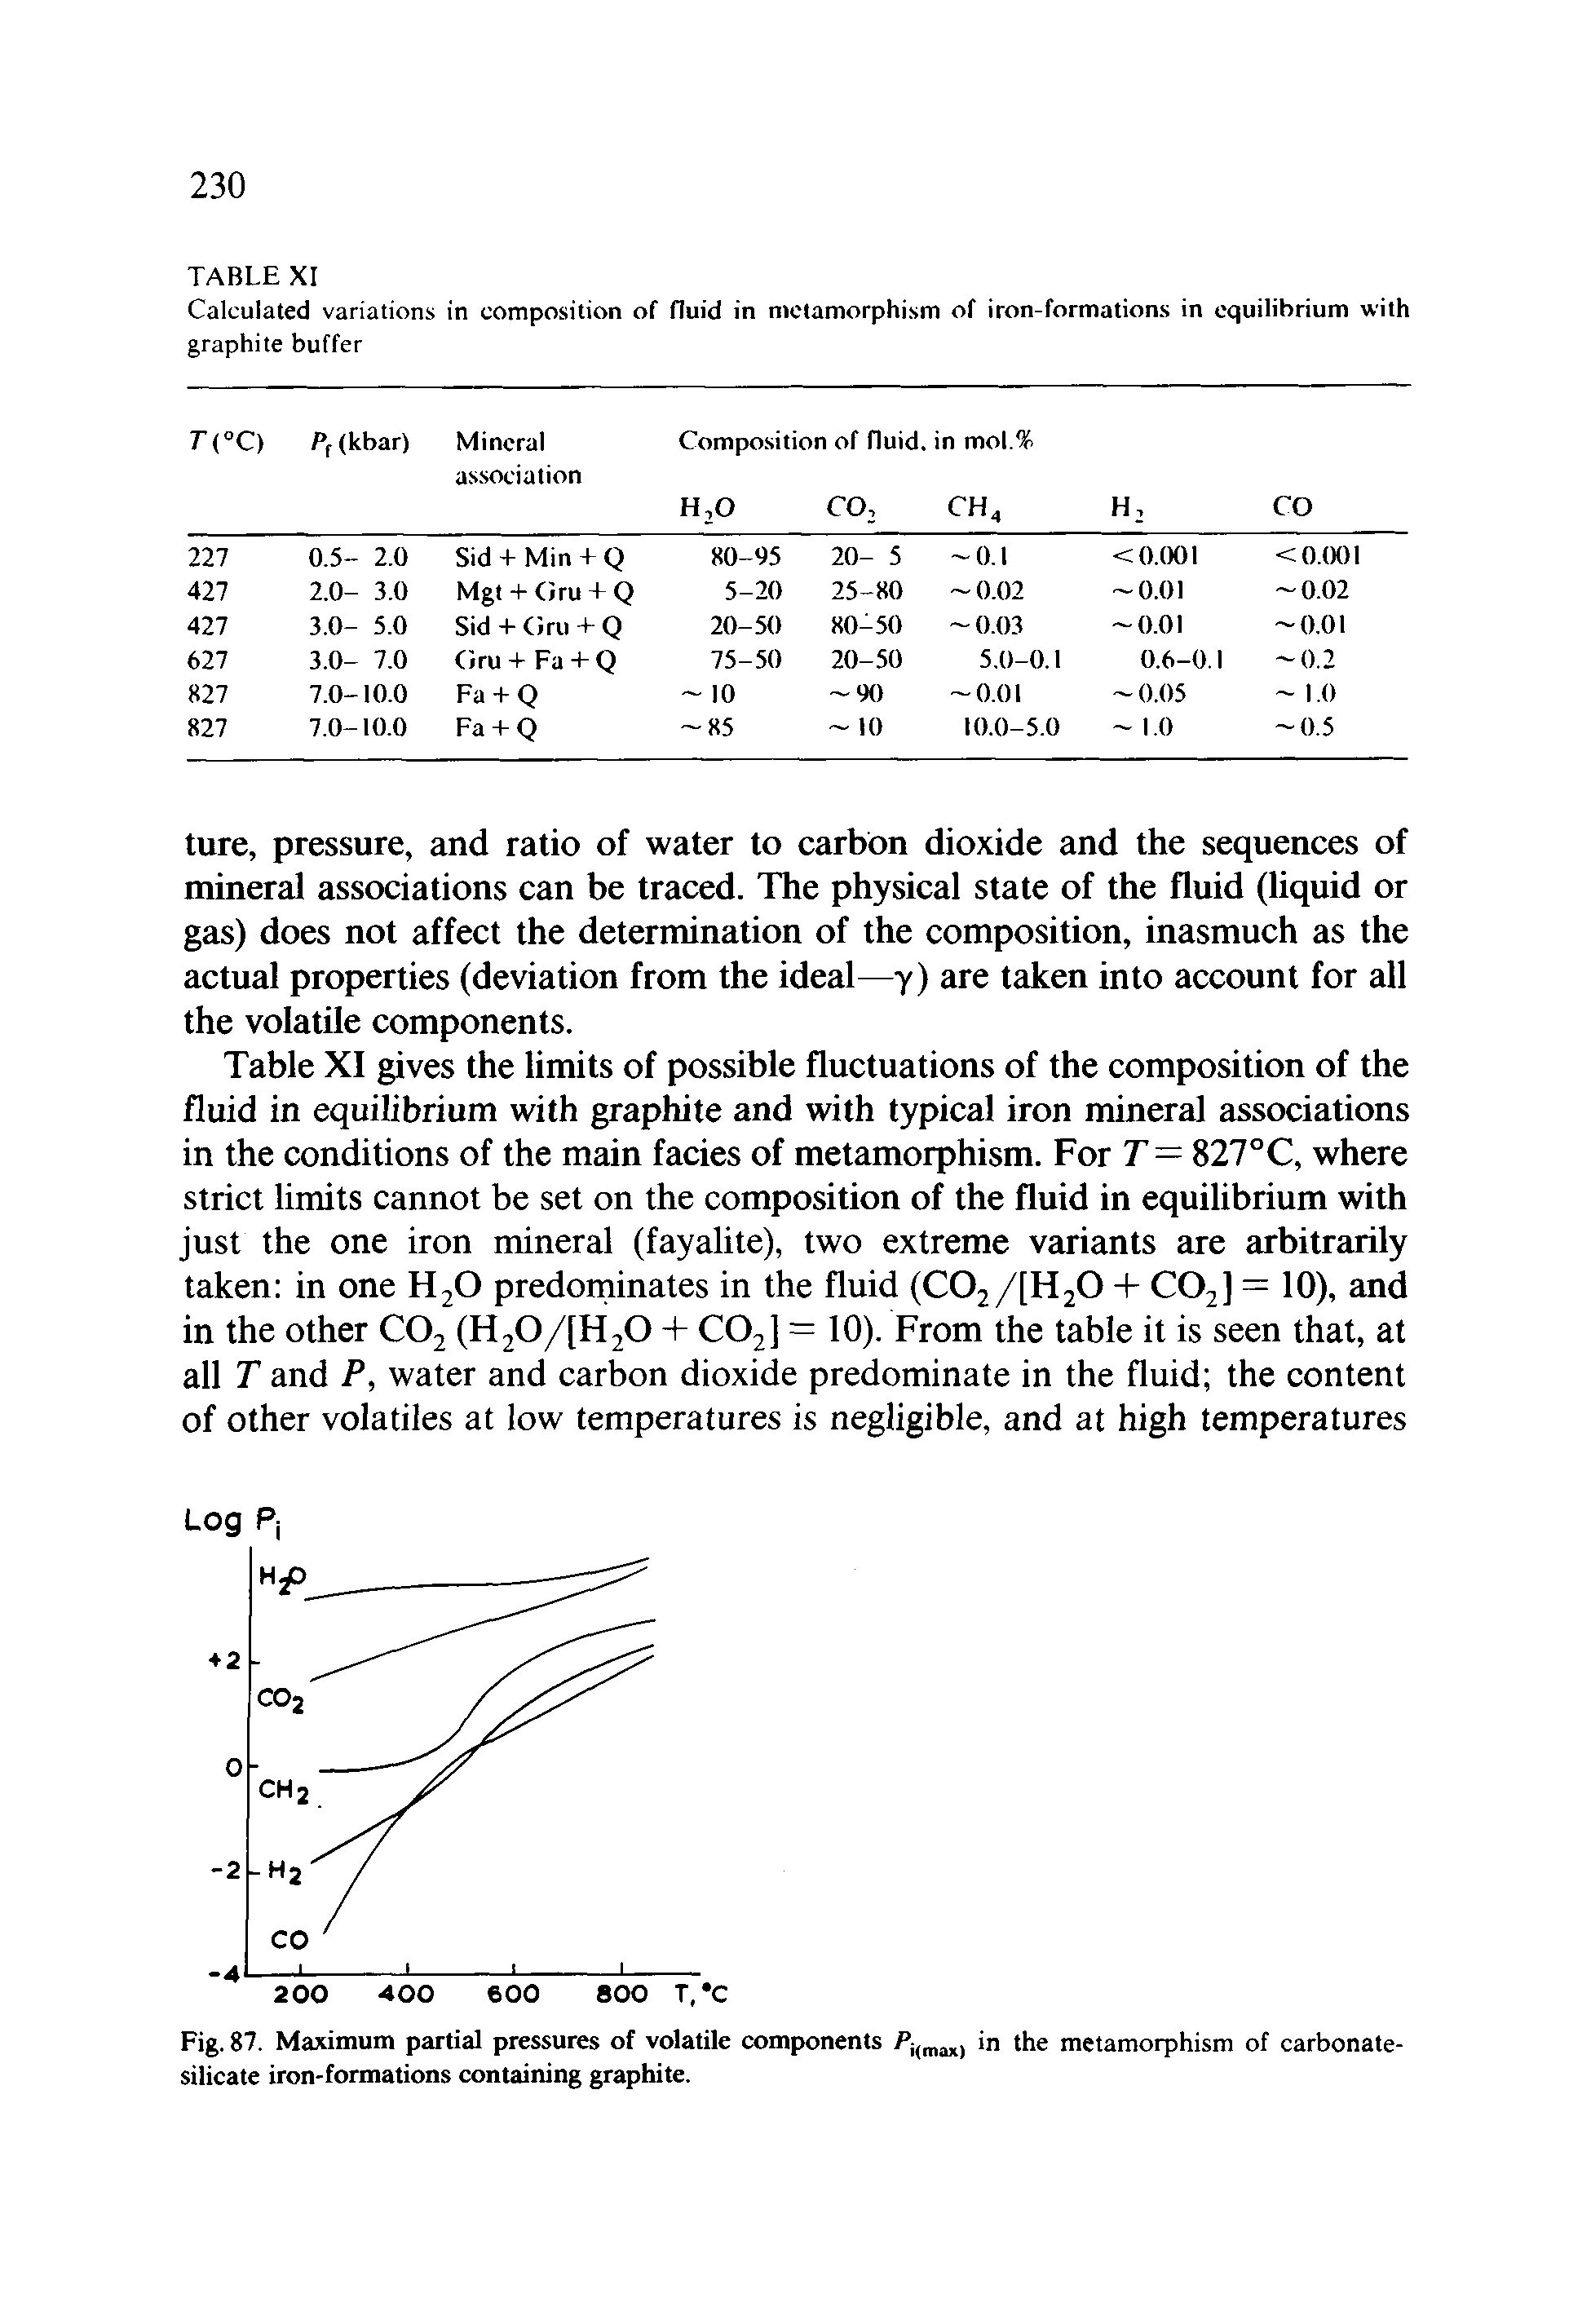 Table XI gives the limits of possible fluctuations of the composition of the fluid in equilibrium with graphite and with typical iron mineral associations in the conditions of the main facies of metamorphism. For T = 827°C, where strict limits cannot be set on the composition of the fluid in equilibrium with just the one iron mineral (fayalite), two extreme variants are arbitrarily taken in one HjO predominates in the fluid (C02/[H20 + CO2] = 10), and in the other CO2 (H20/[H20 + CO2] = 10). From the table it is seen that, at all T and P, water and carbon dioxide predominate in the fluid the content of other volatiles at low temperatures is negligible, and at high temperatures...